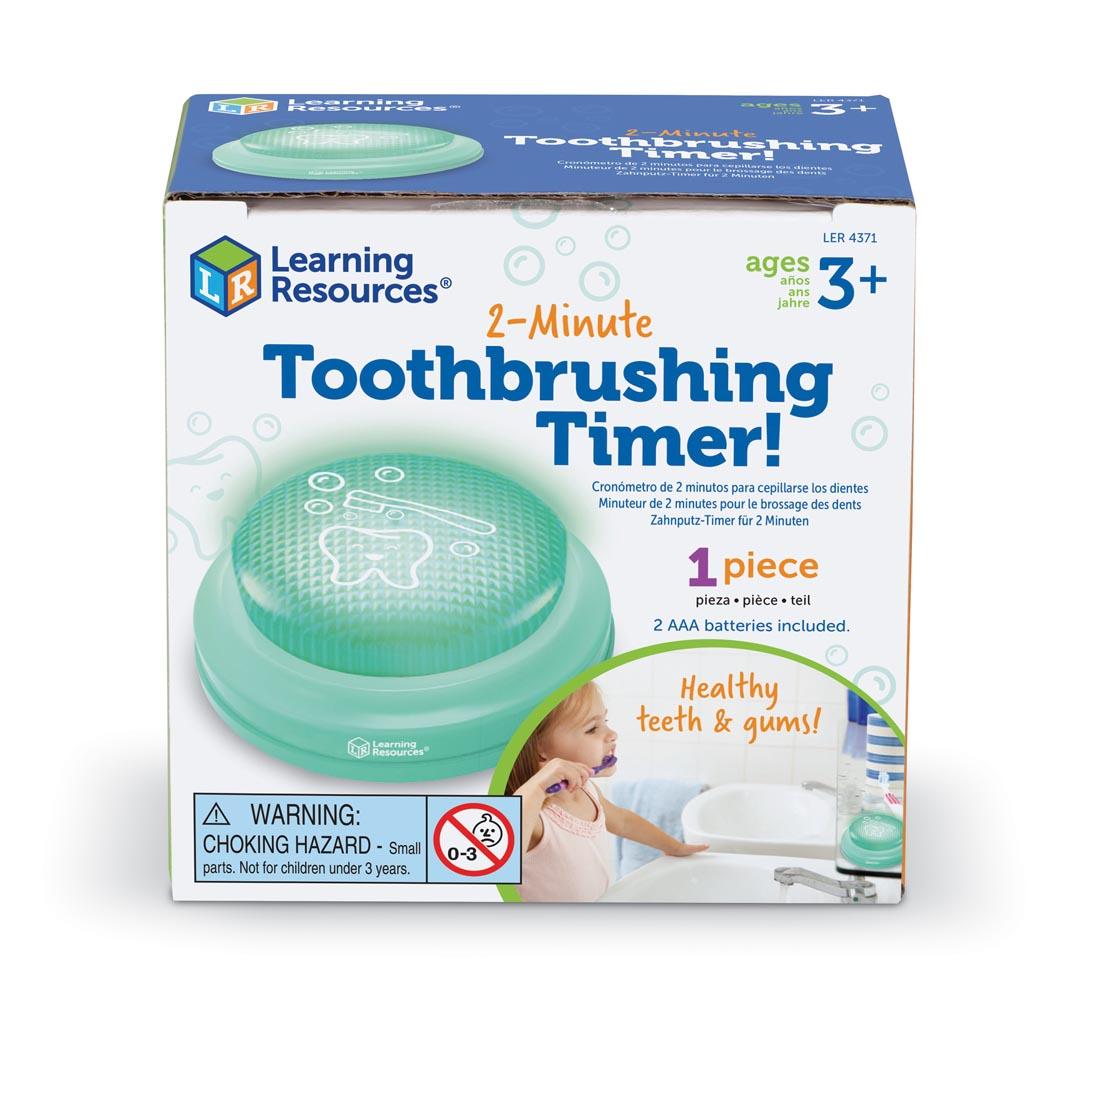 2-Minute Toothbrushing Timer By Learning Resources in box